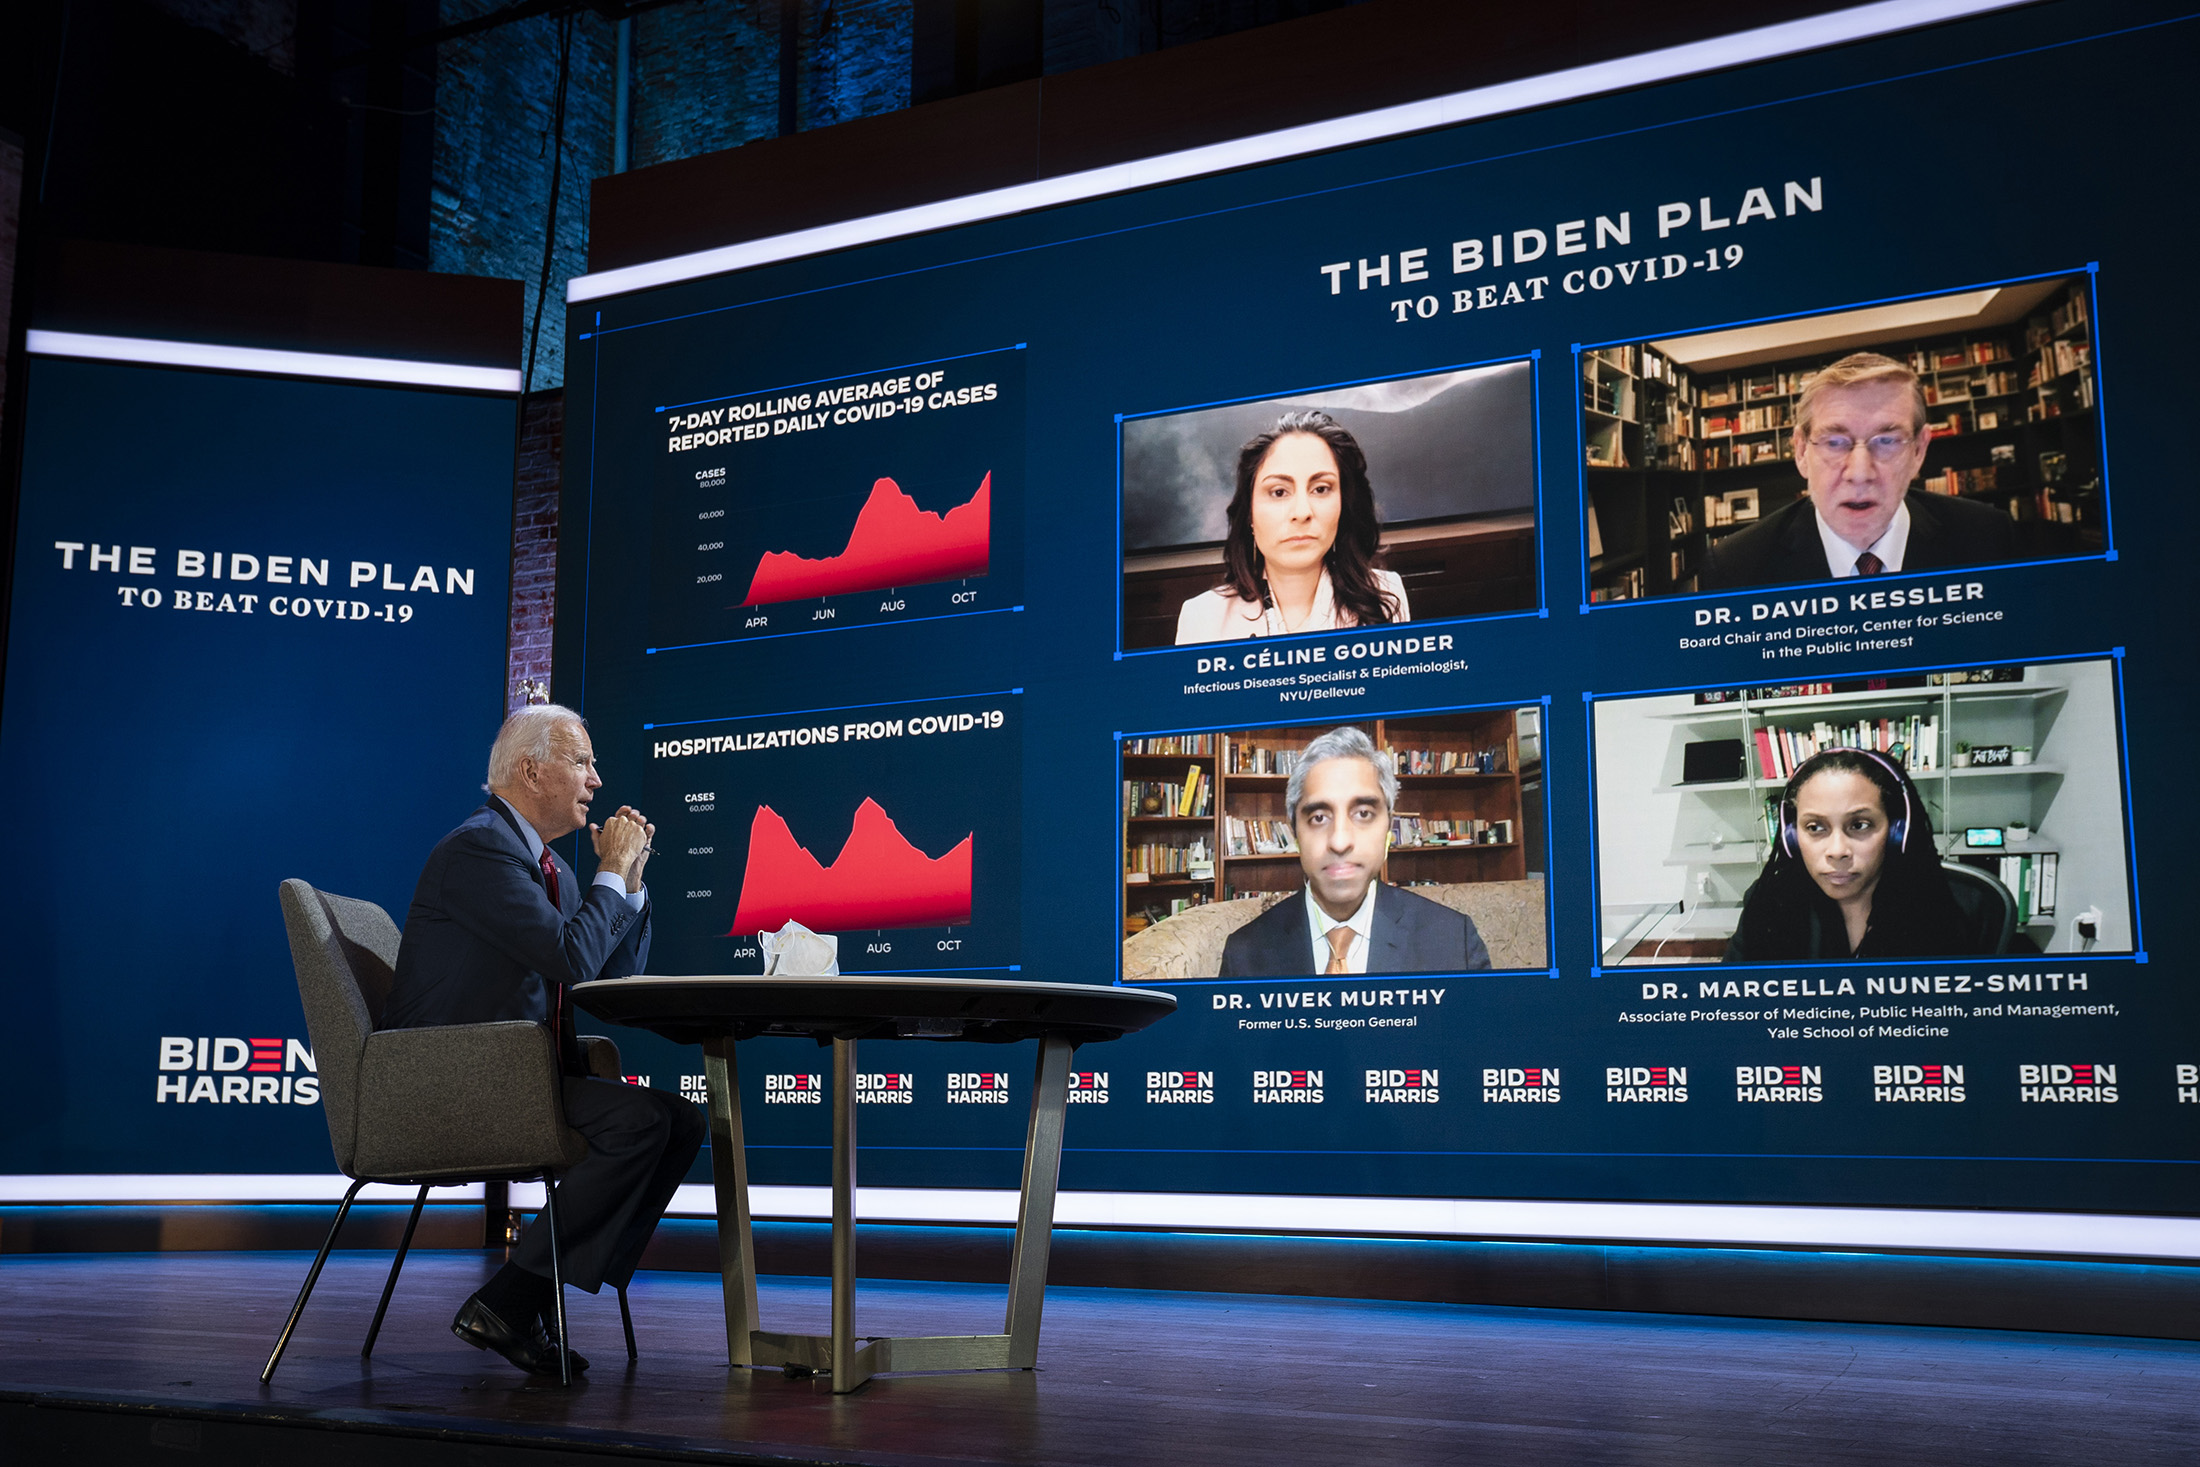 Joe Biden attends a virtual coronavirus briefing with a team of doctors, including Dr. Vivek Murthy, on Oct. 28.